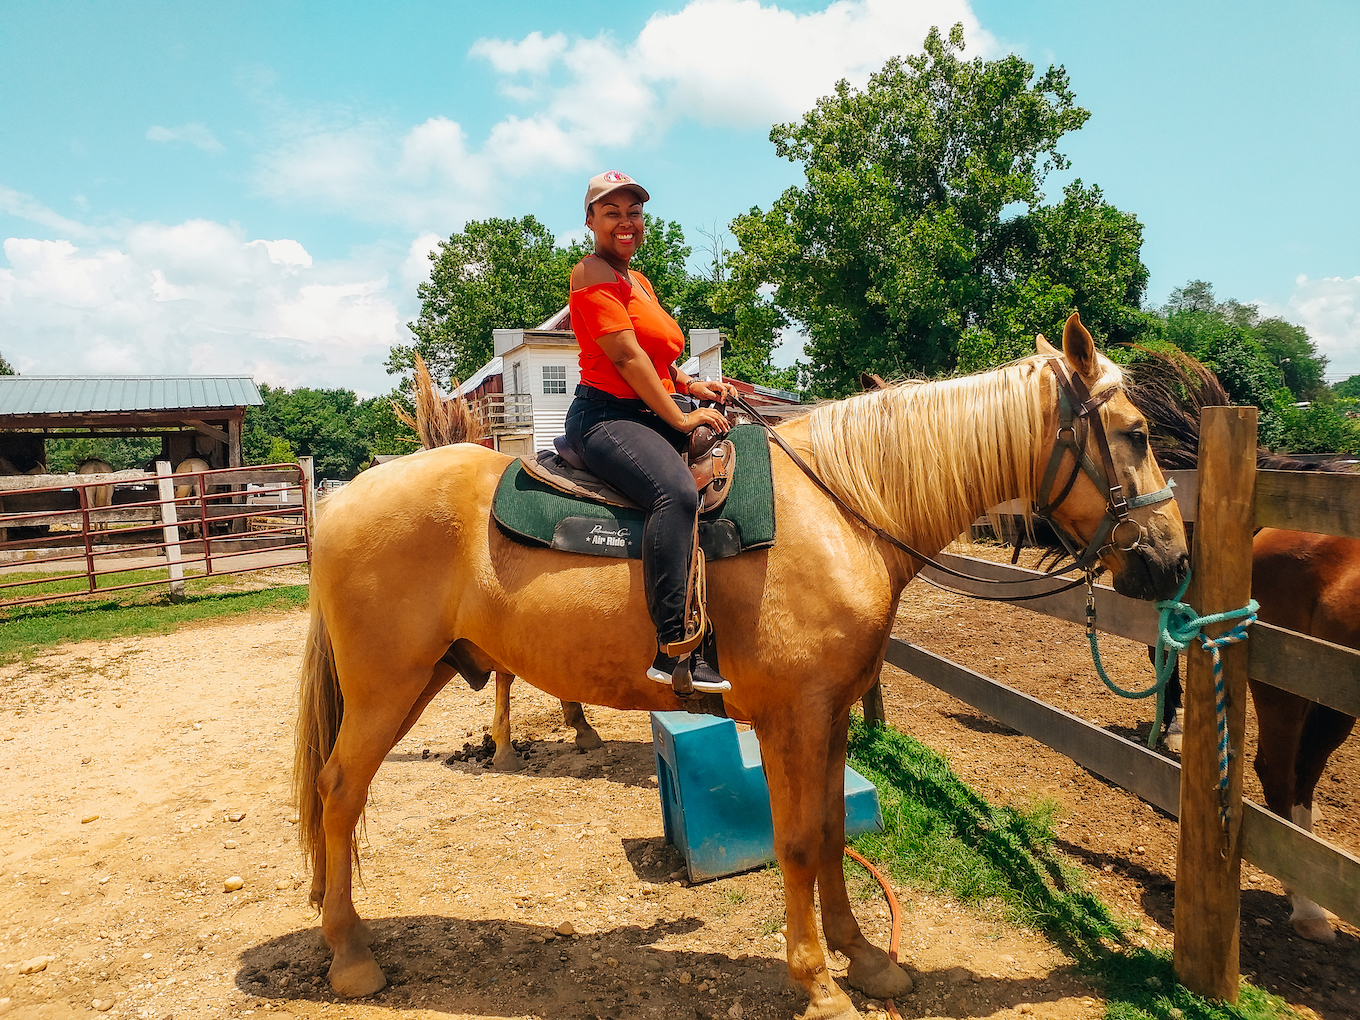 This Bahamian Gyal blogger, Rogan sits high on her horse at Piscataway Farm. She is smiling for the camera.